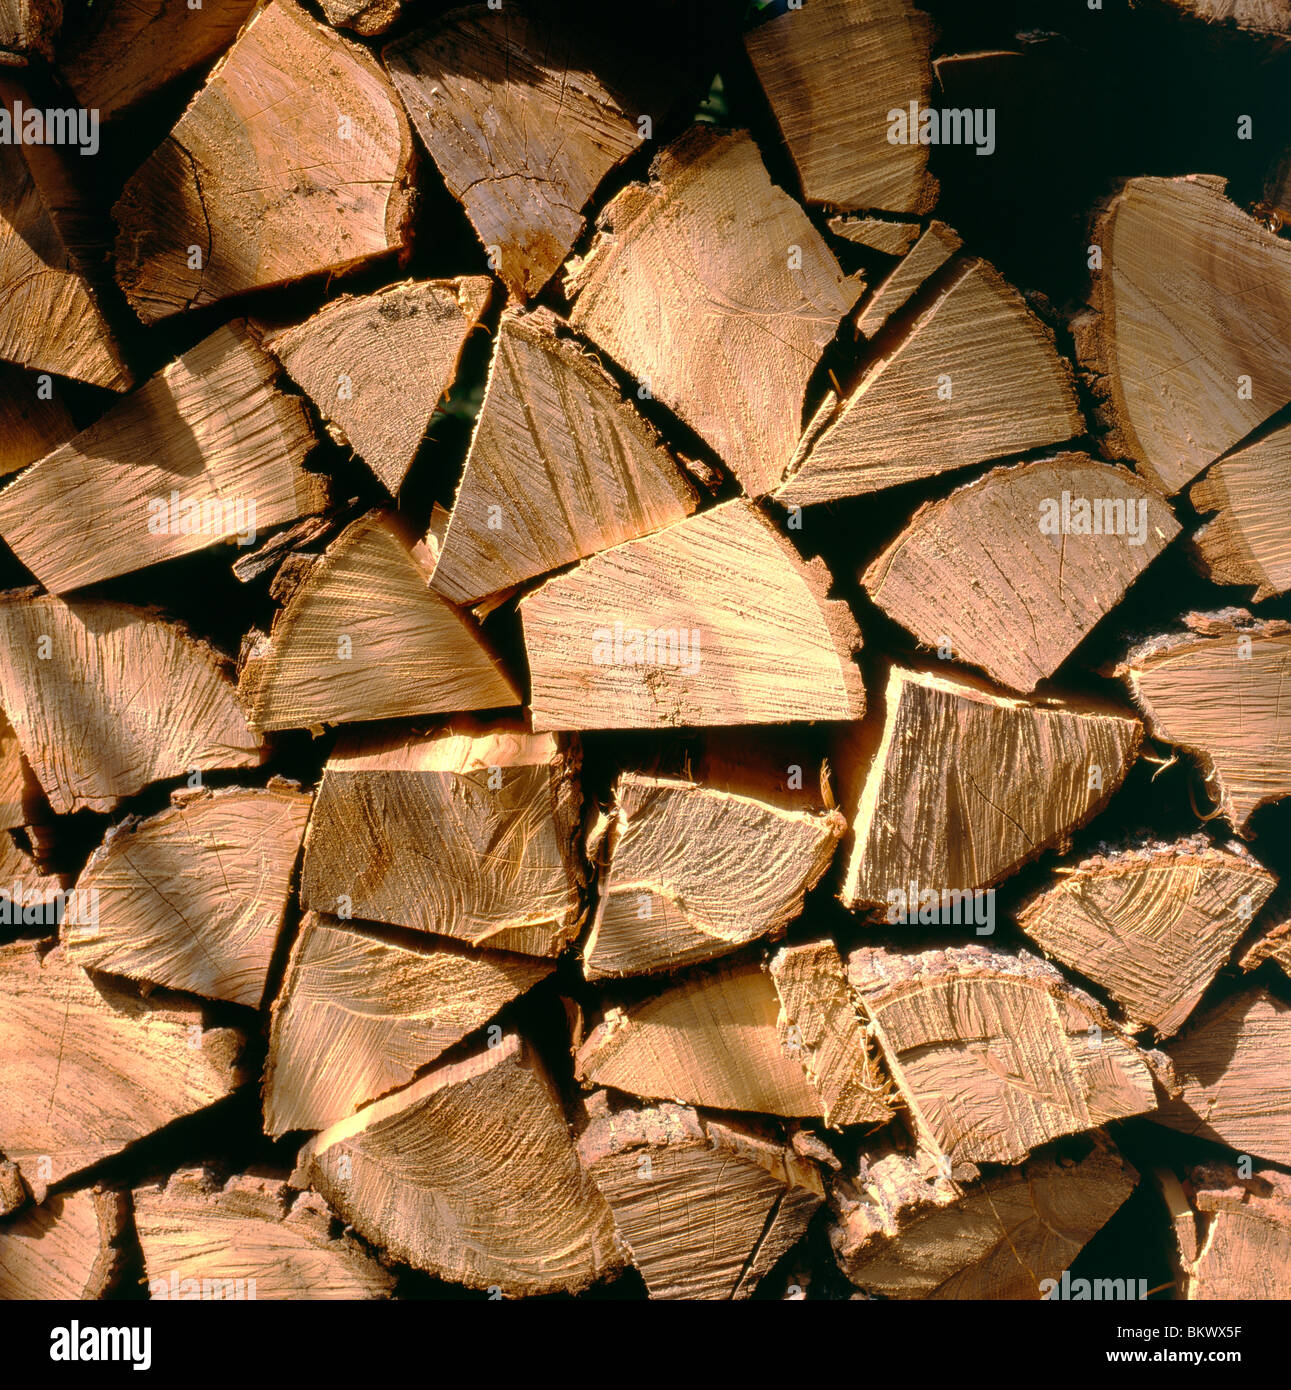 Neatly stacked pile of cut and split oak firewood Stock Photo